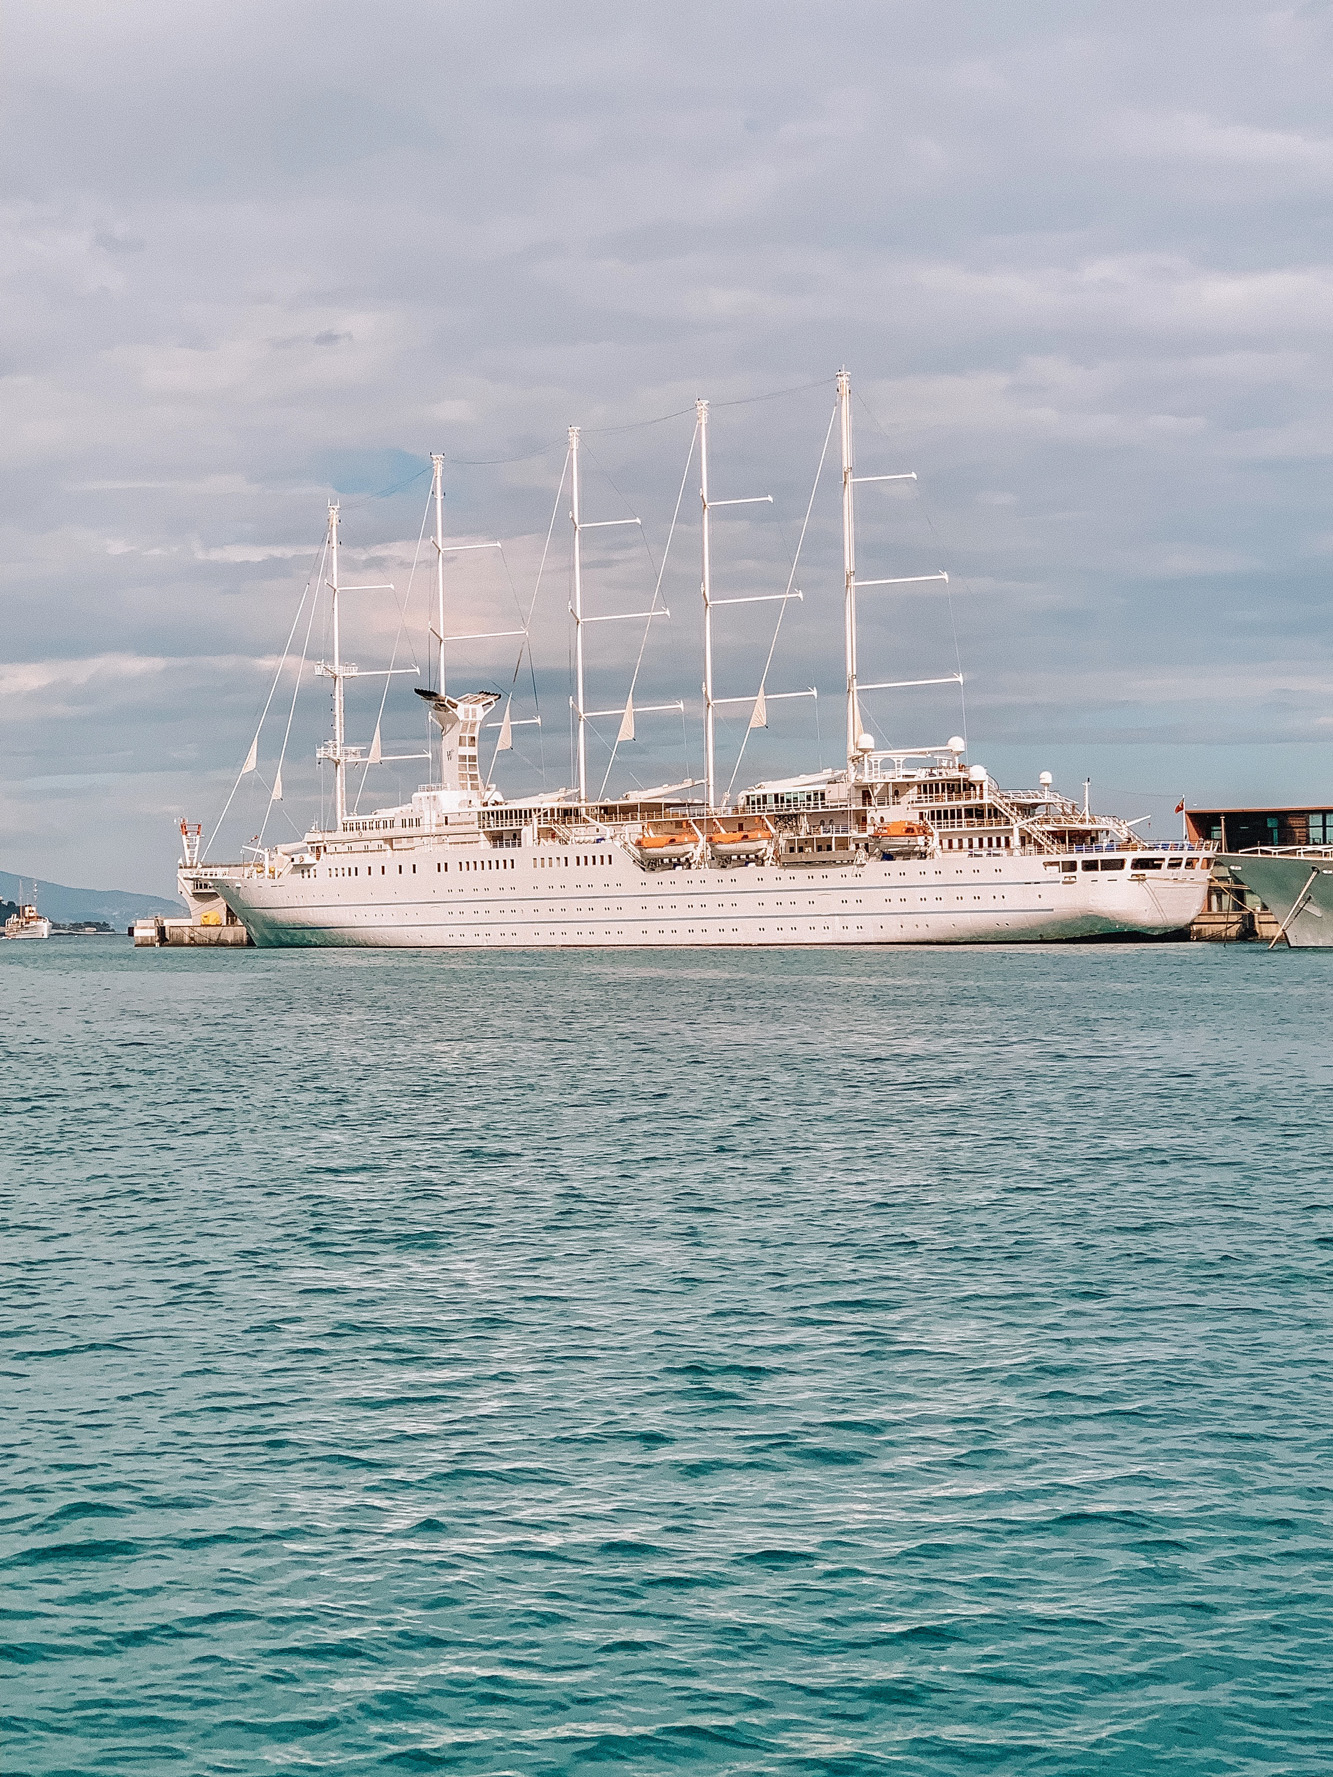 Mediterranean Cruise Travel Guide - From Barcelona to Rome | Windstar Cruise Review | Kristy Wicks